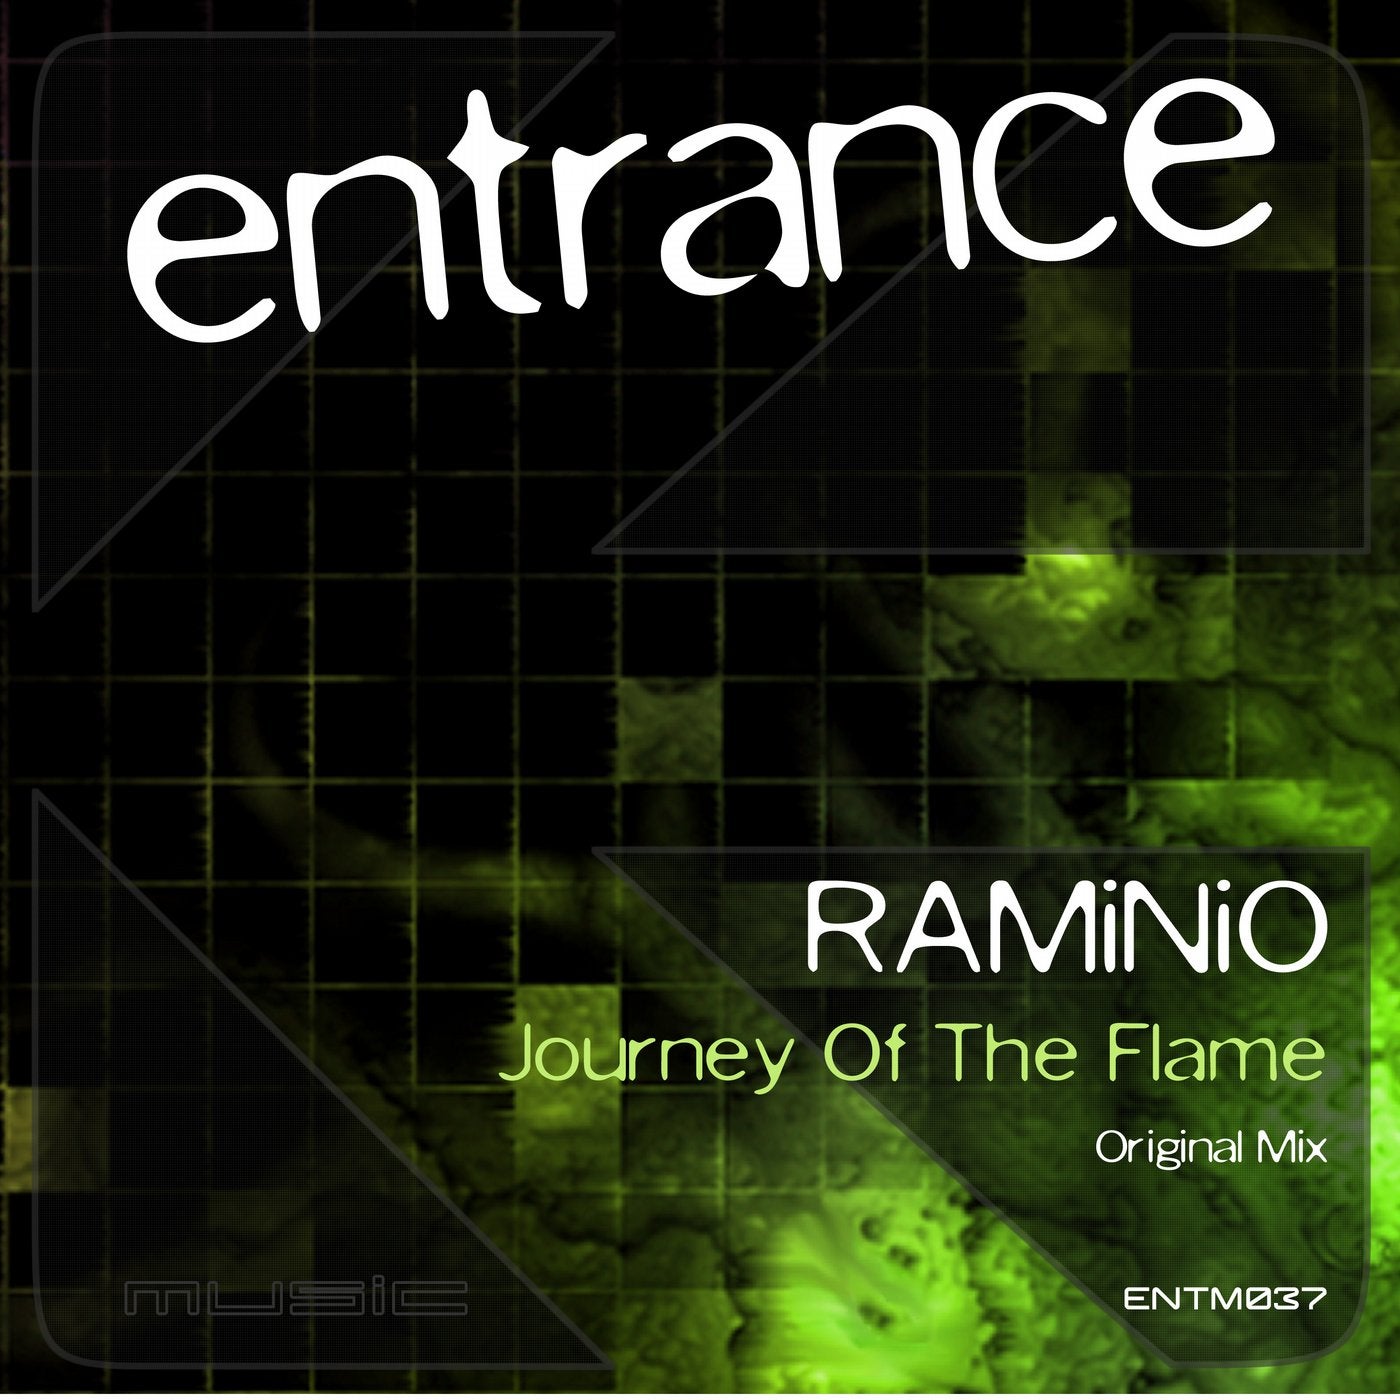 Journey of the Flame